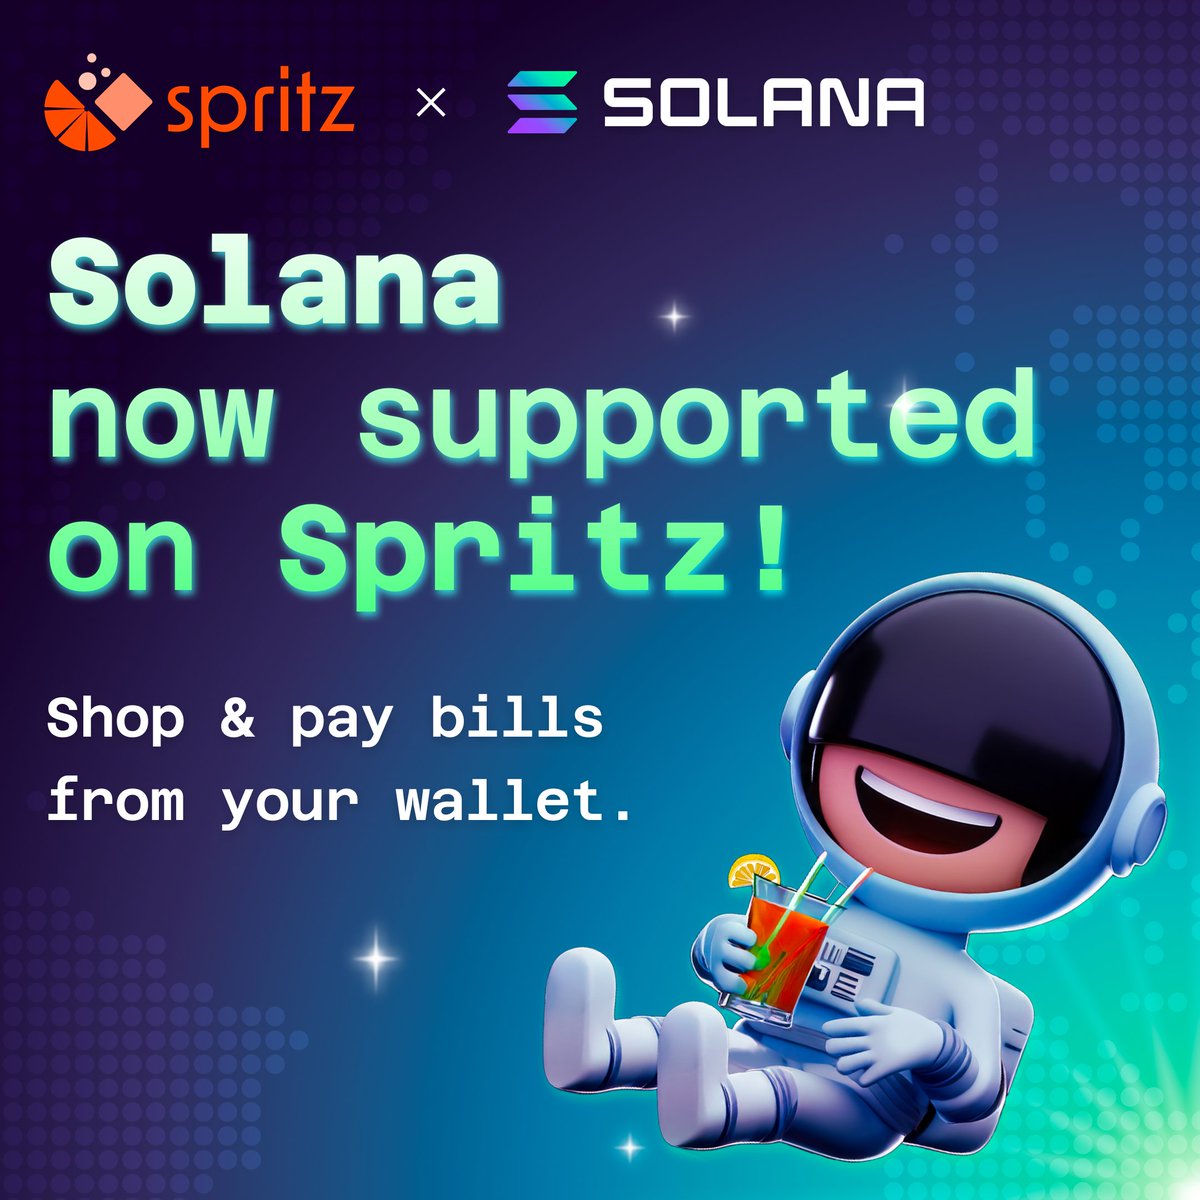 🚀 Big News for Solana Users! 🚀 Spritz Finance is now on Solana!!! 🙌🏻 Pay bills 💳, shop 🛒, and on/off-ramp ⚡ using crypto directly from your wallet. Get started today! 👇 Spritz.Finance/Solana